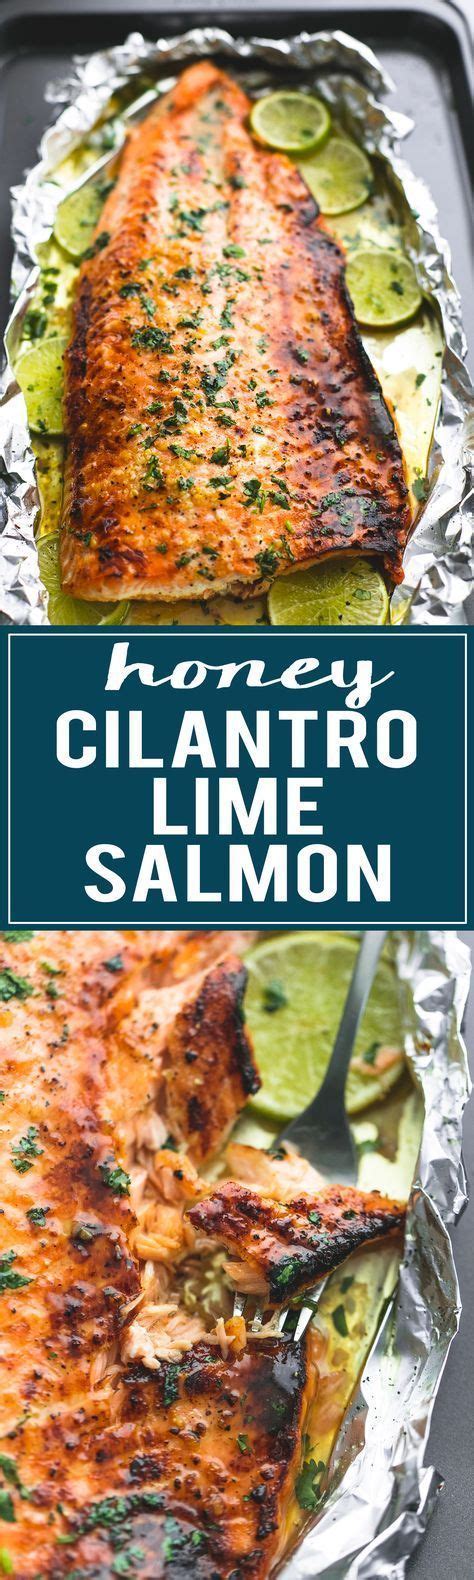 I rubbed it with extra virgin olive oil and seasoned it generously with salt and freshly cracked black. Healthy, Baked Honey Cilantro Lime Salmon is ready in 30 ...